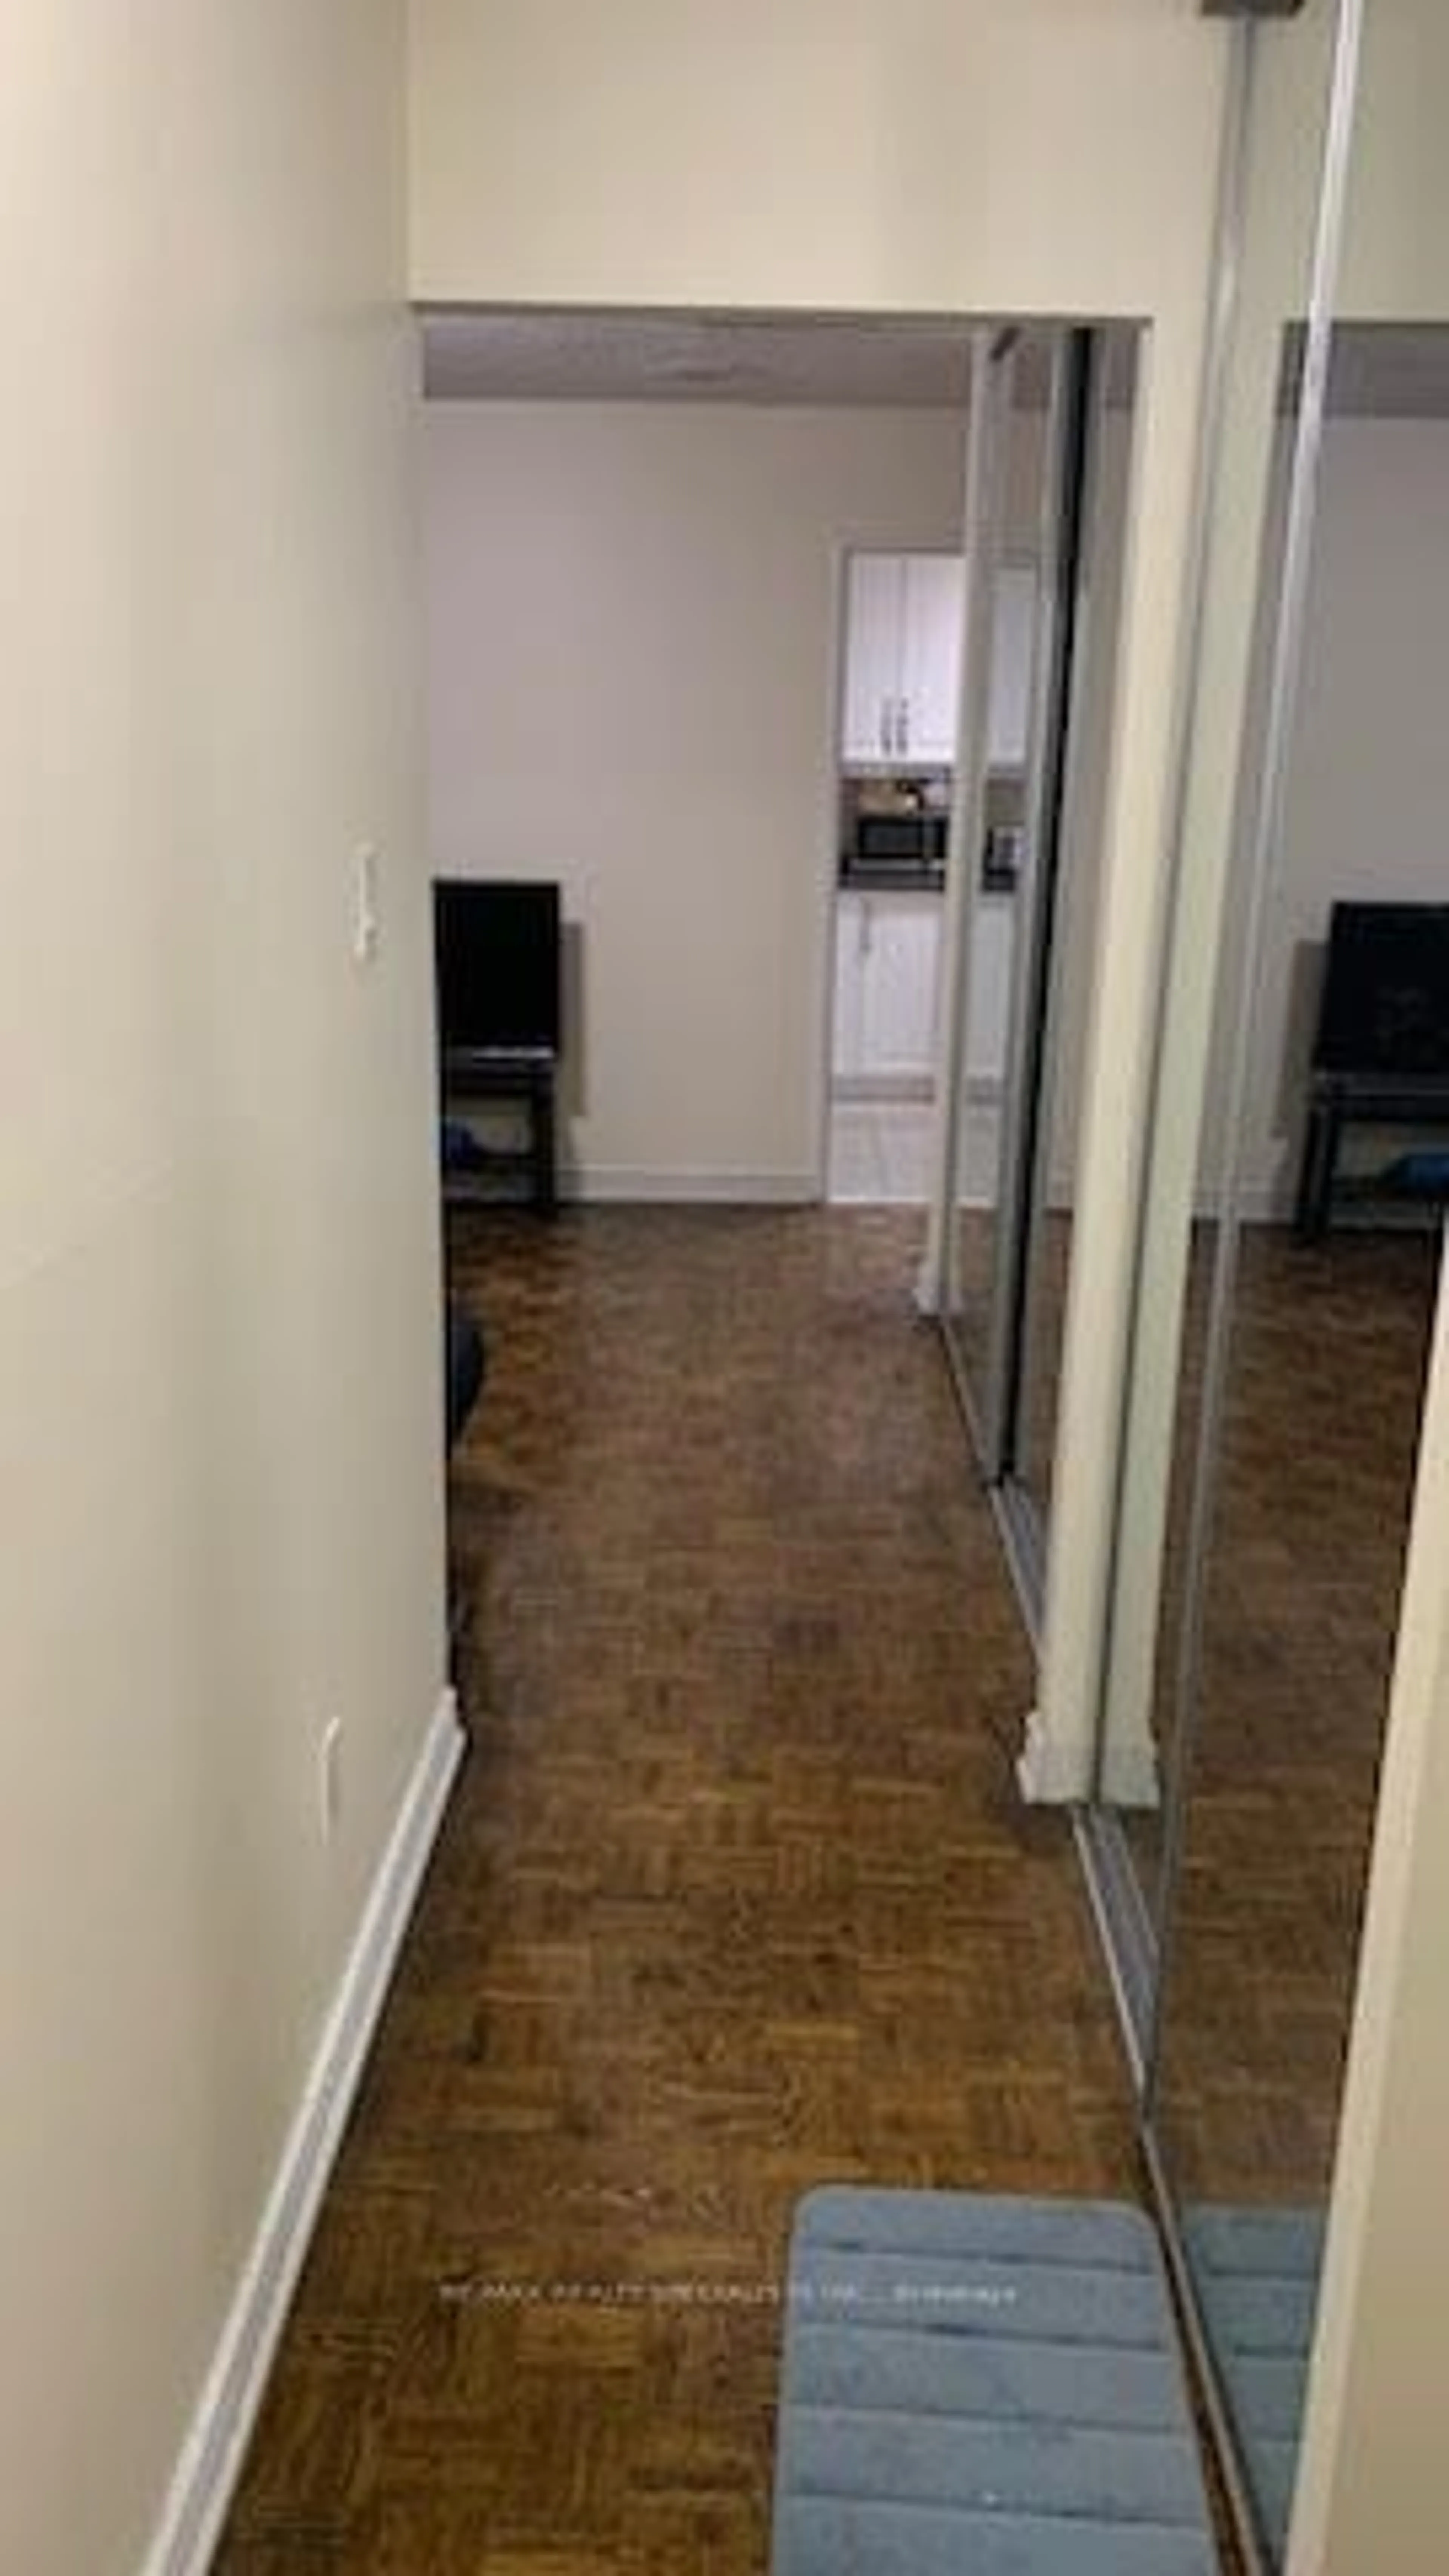 A pic of a room for 100 Prudential Dr #304, Toronto Ontario M1P 4V4